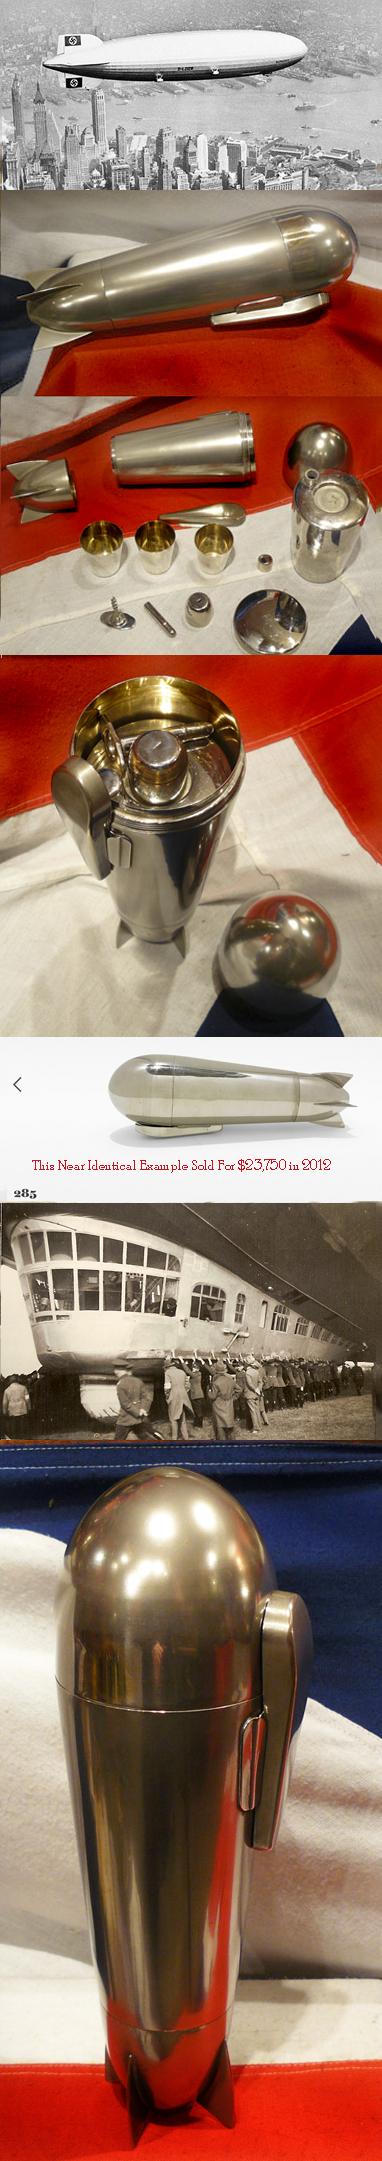 A Spectacular 1928, Original 'Zeppelin' Issue Airship Cocktail Shaker & Travelling Bar. The Last Example We Found Sold For $23,000 In 2012 in Auction